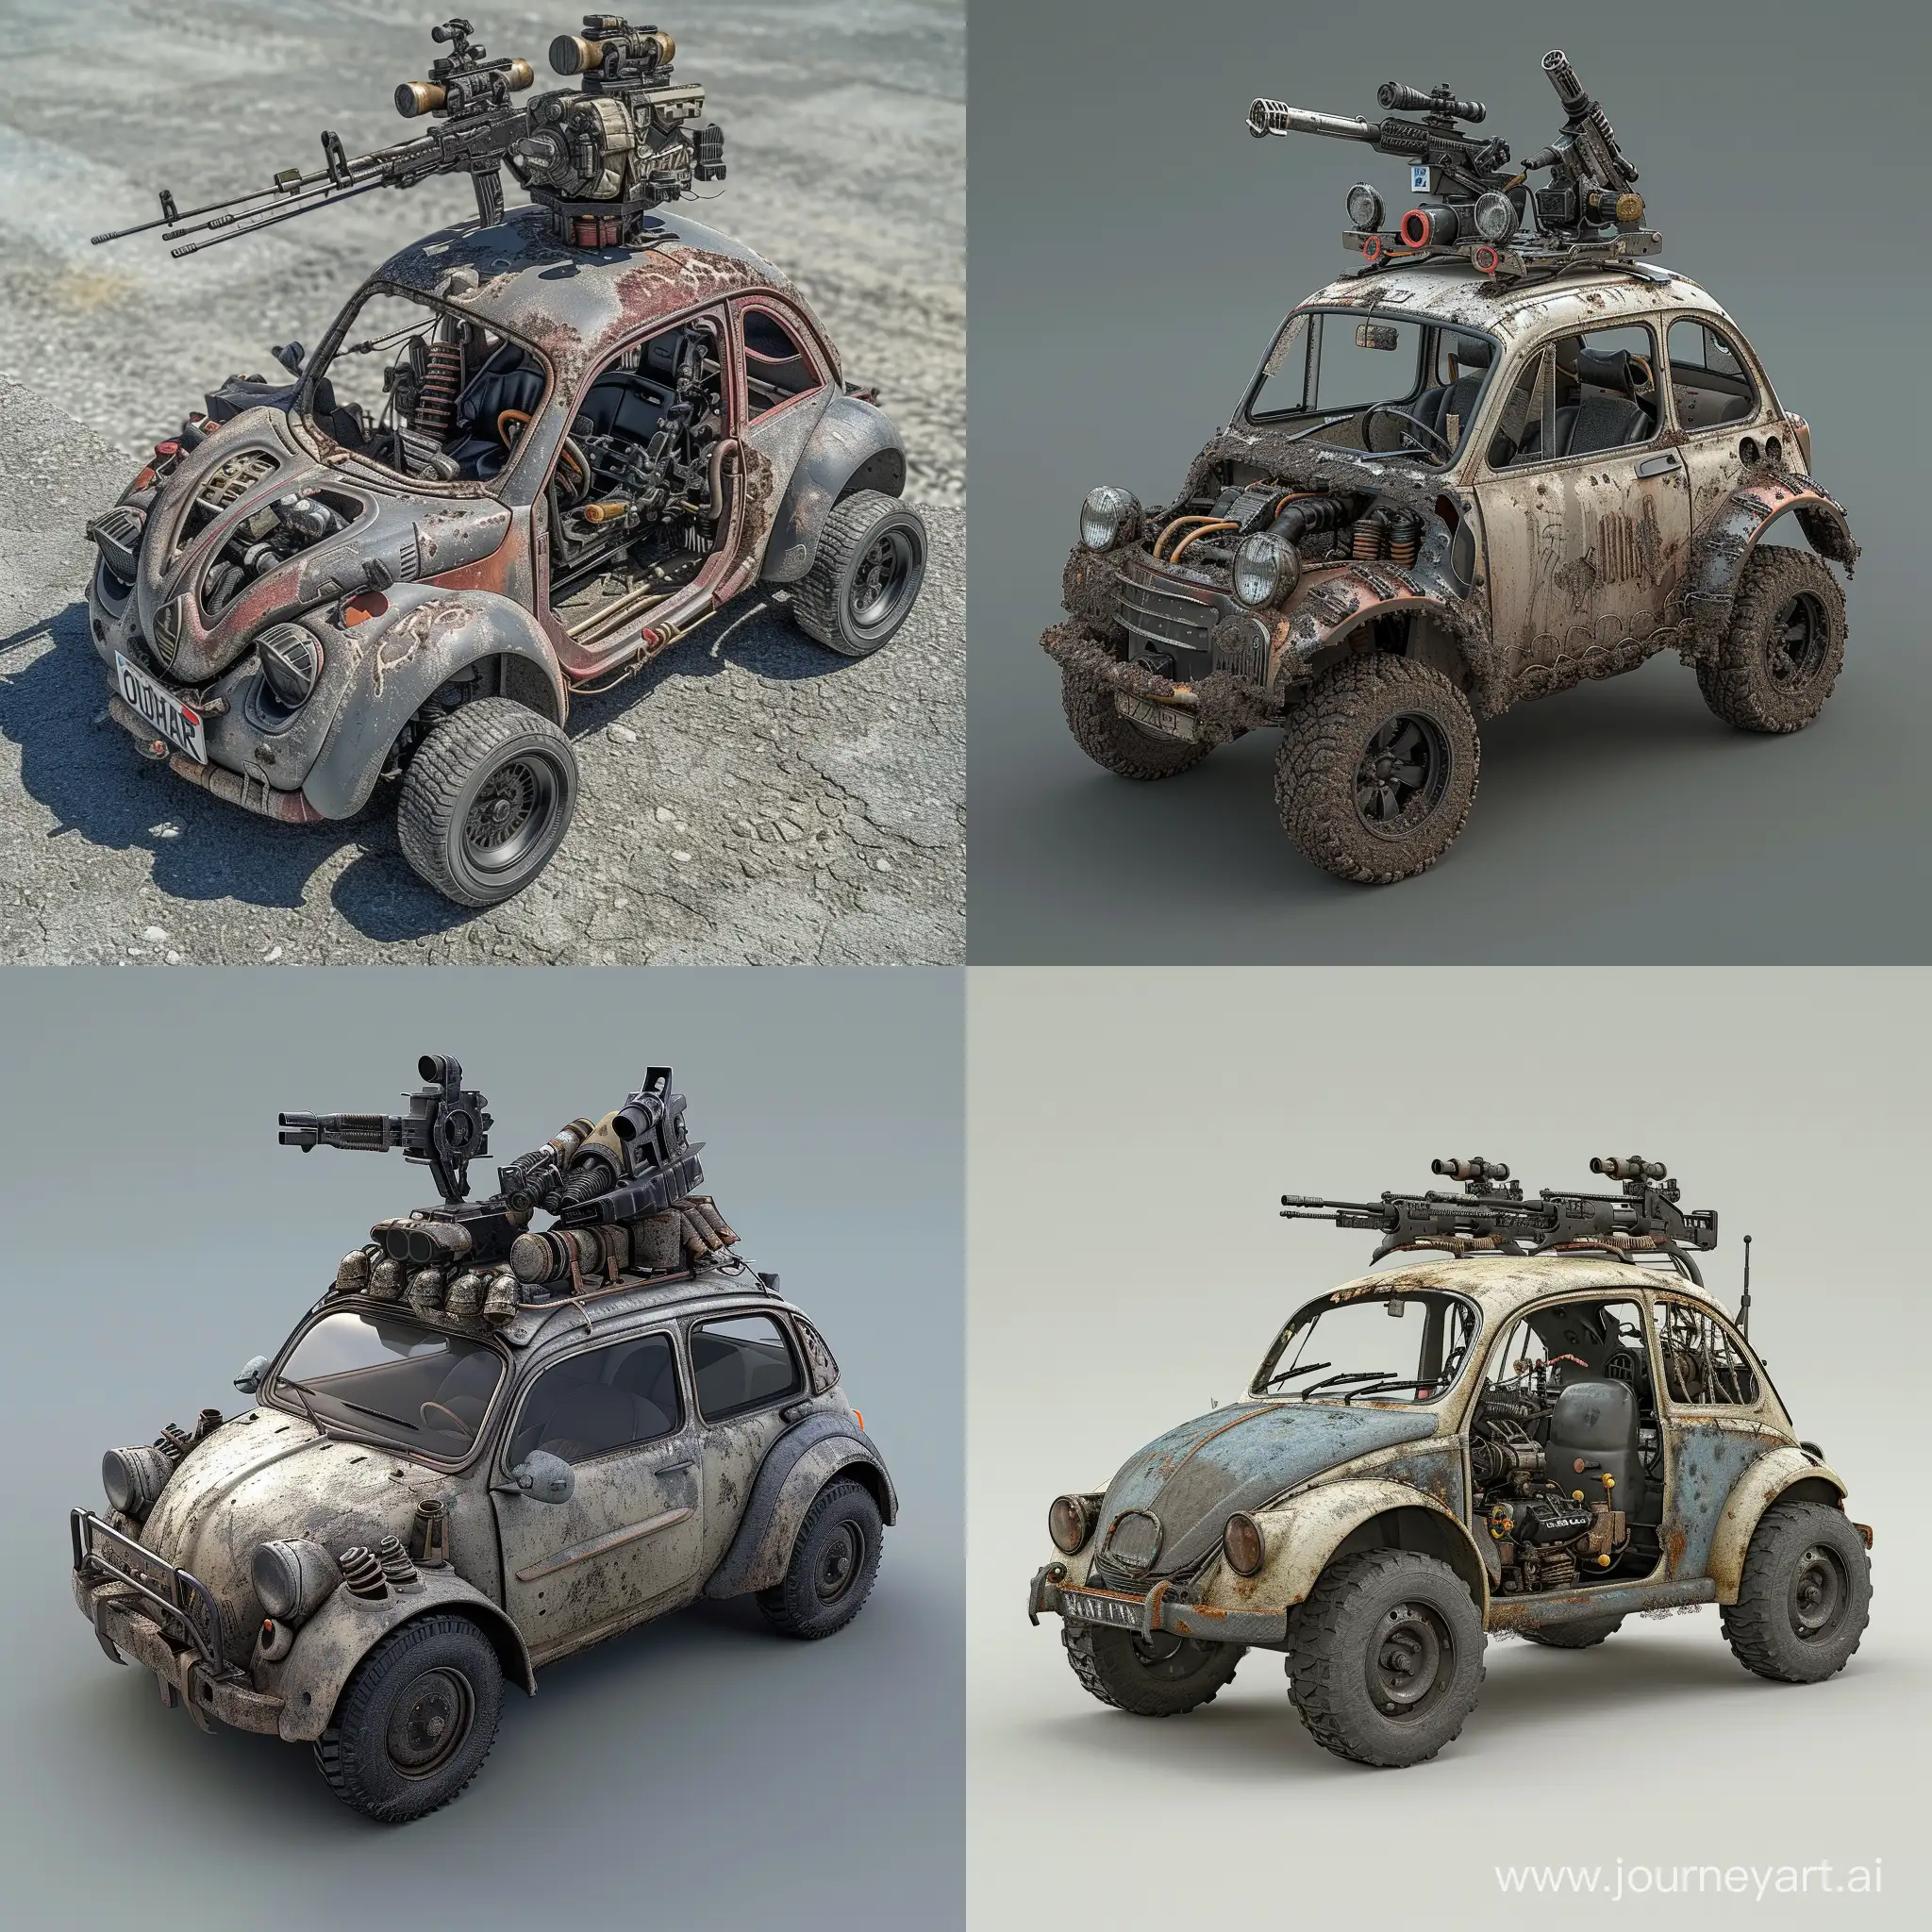 a small car without a body and other things, only the engine and everything you need from the chassis, there are 2 mini-machine guns on top, the car itself is covered with armor